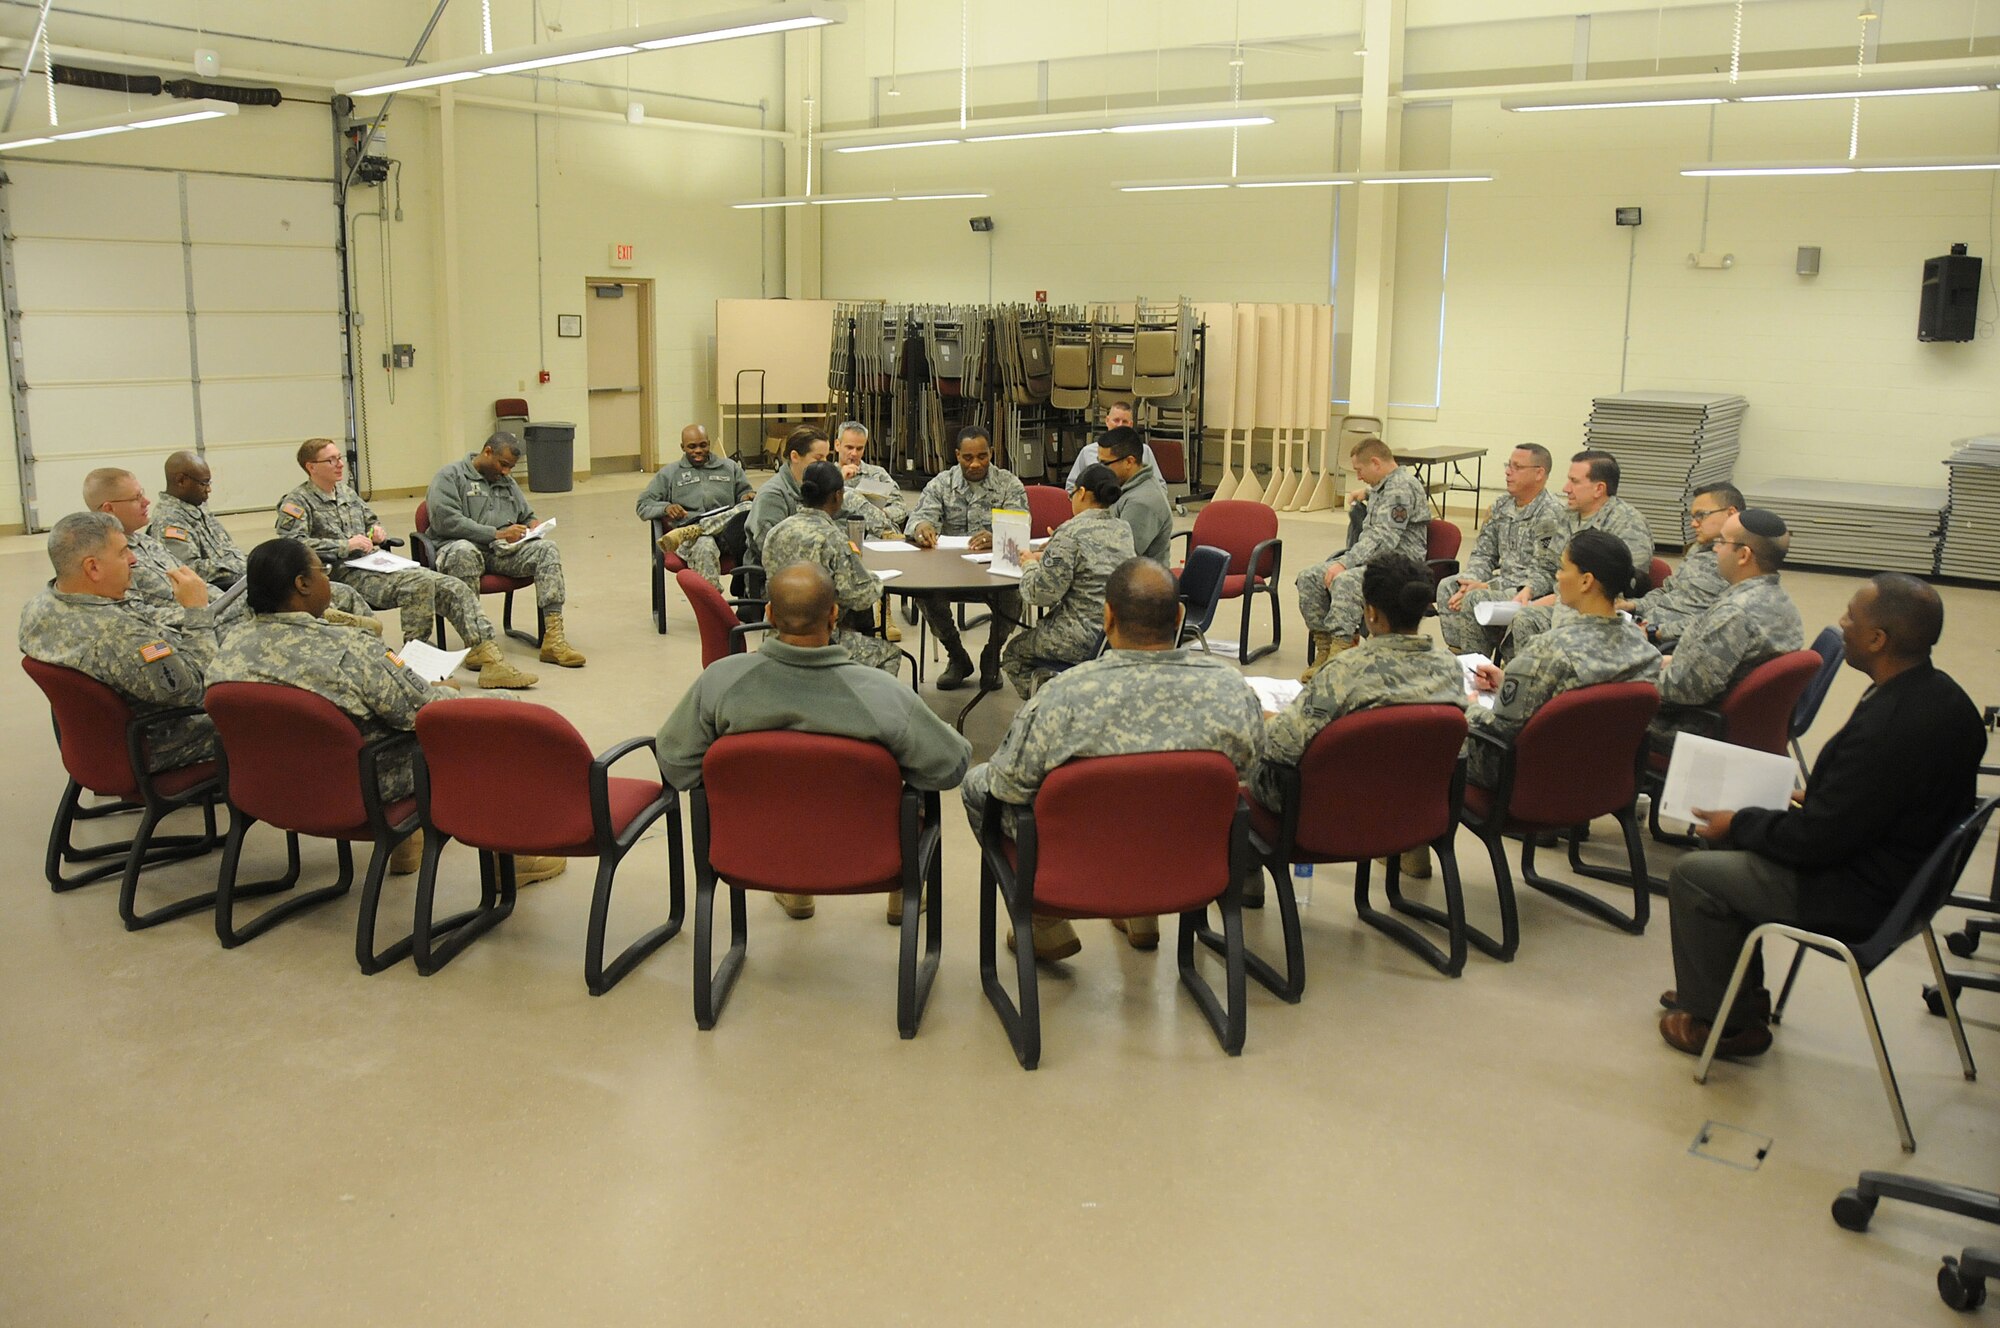 Army and Air Force chaplains and chaplain assistants from all over N.J., sit at a simulated discussion during the Traumatic Event Management course Jan. 16, 2015, at Joint Base McGuire-Dix-Lakehurst, N.J. The scenario discussion took place after a fictitious plane crash. The Army's TEM course was a week long and focused on unit cohesion and effectiveness to help manage crisis situations. The course used on group activities and role playing to reinforce the lessons. At the end of the week, the students are able to take what they learned and bring it back to their units. (U.S. Air National Guard Photo by Airman 1st Class Julia Pyun/Released)